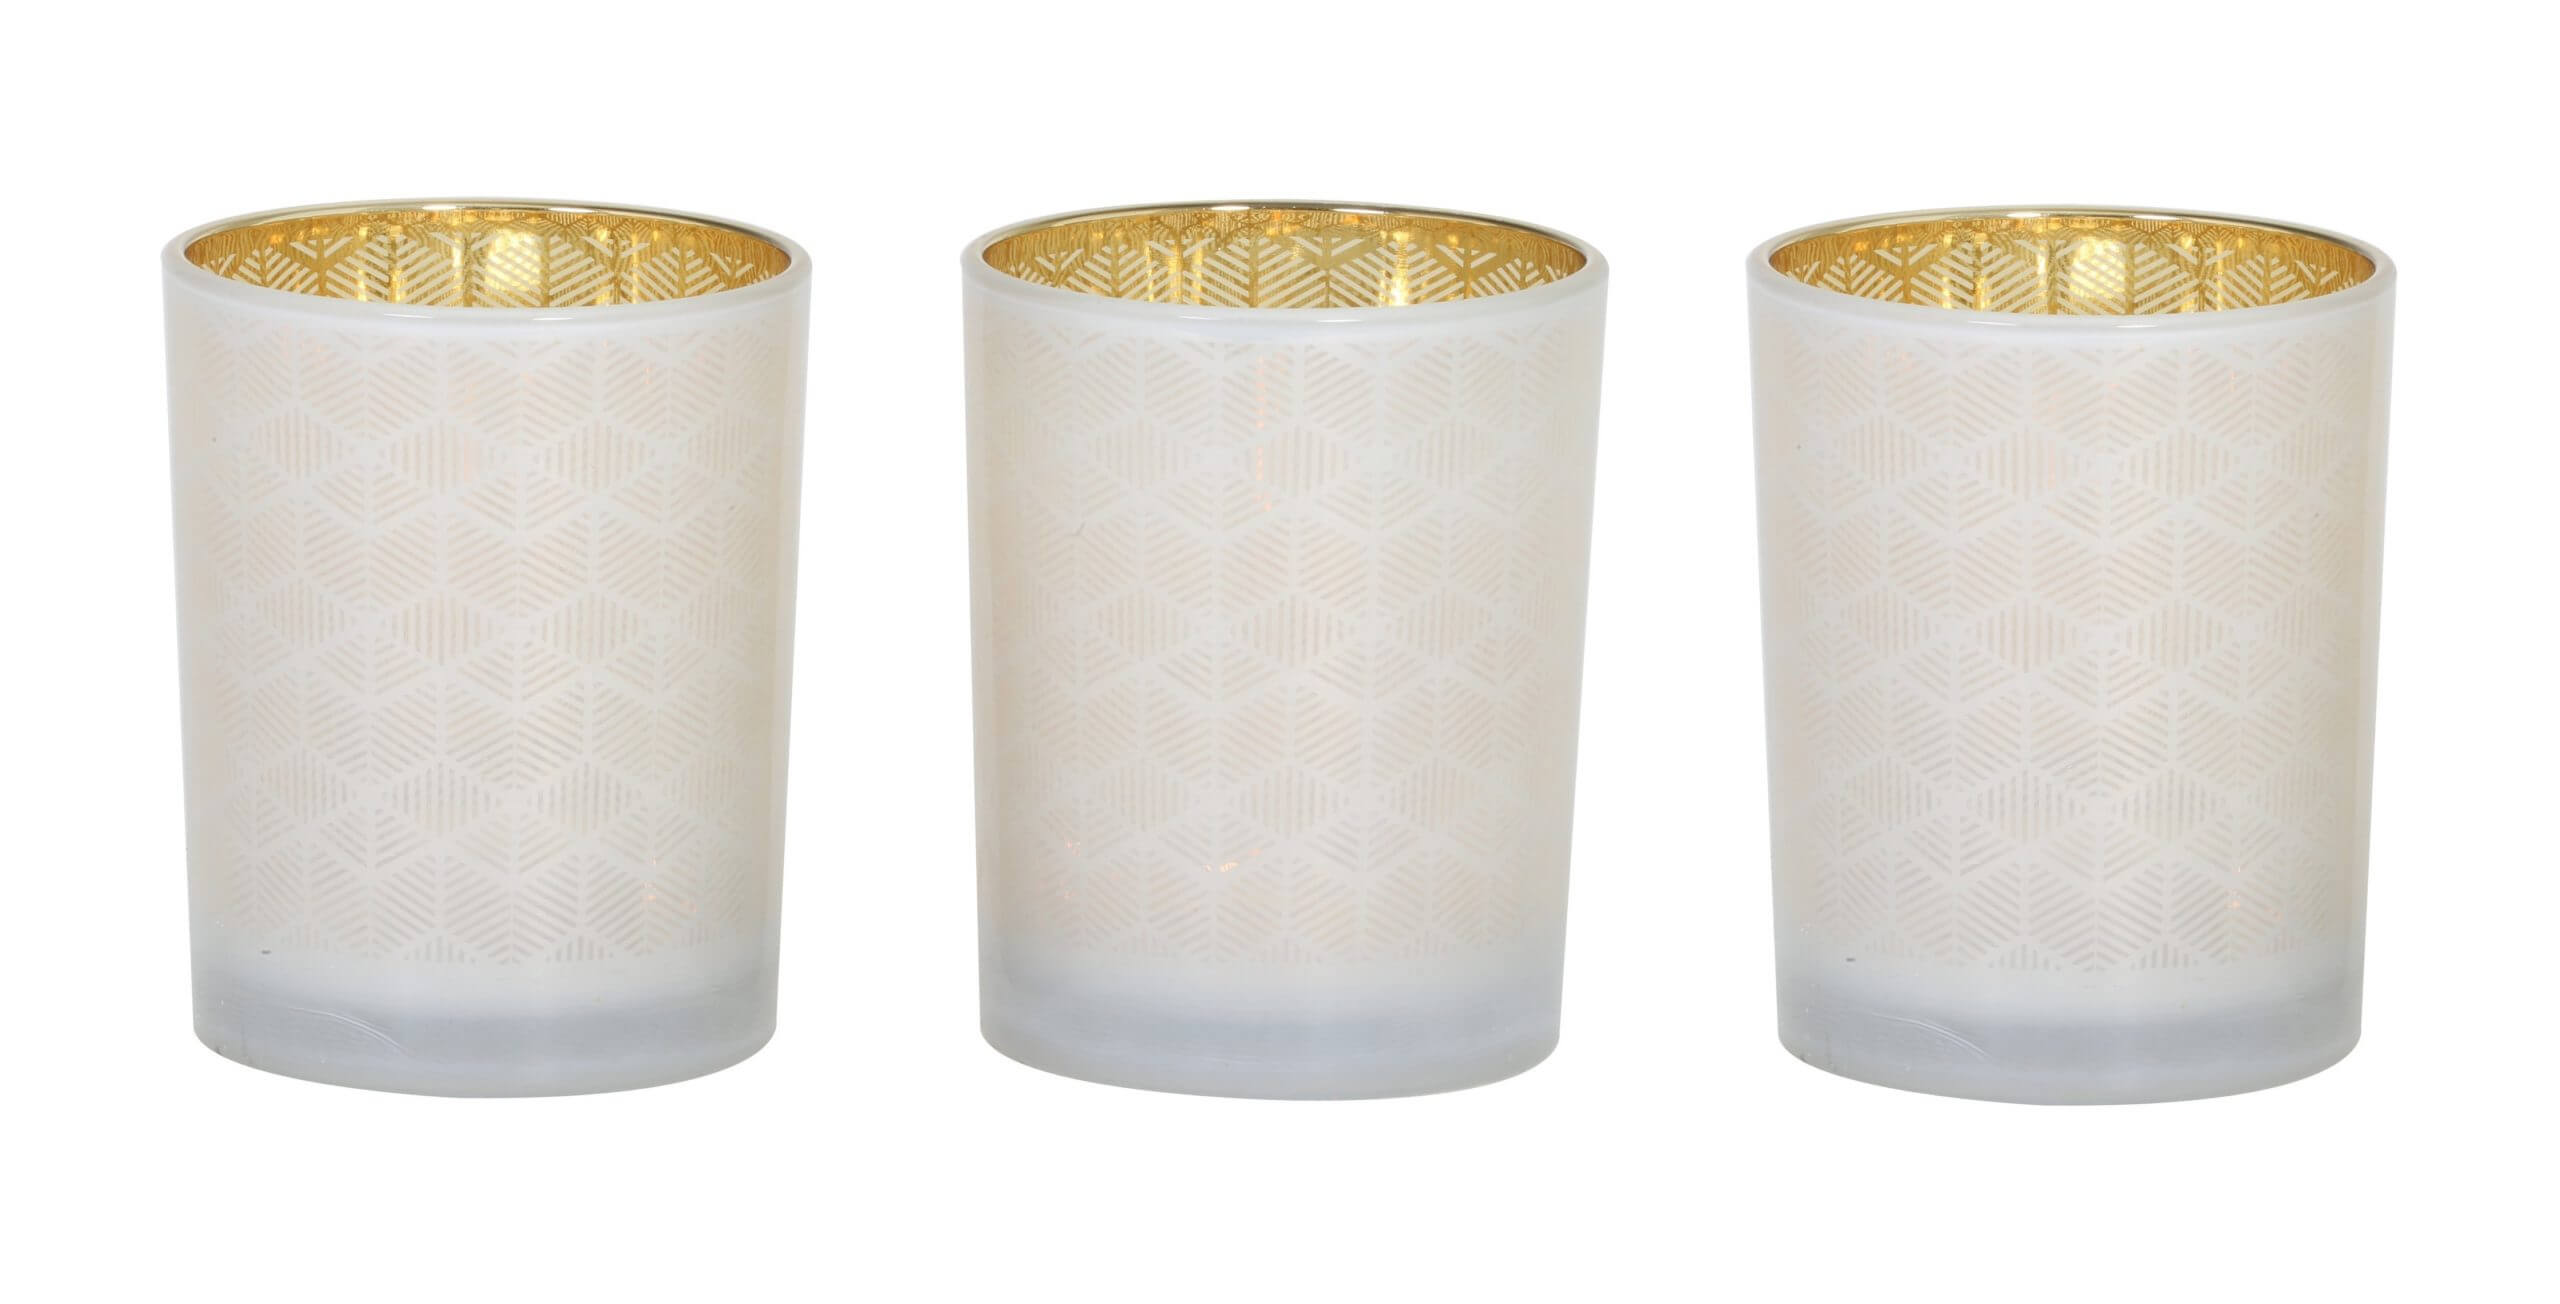 Trio of white and gold tealight votives